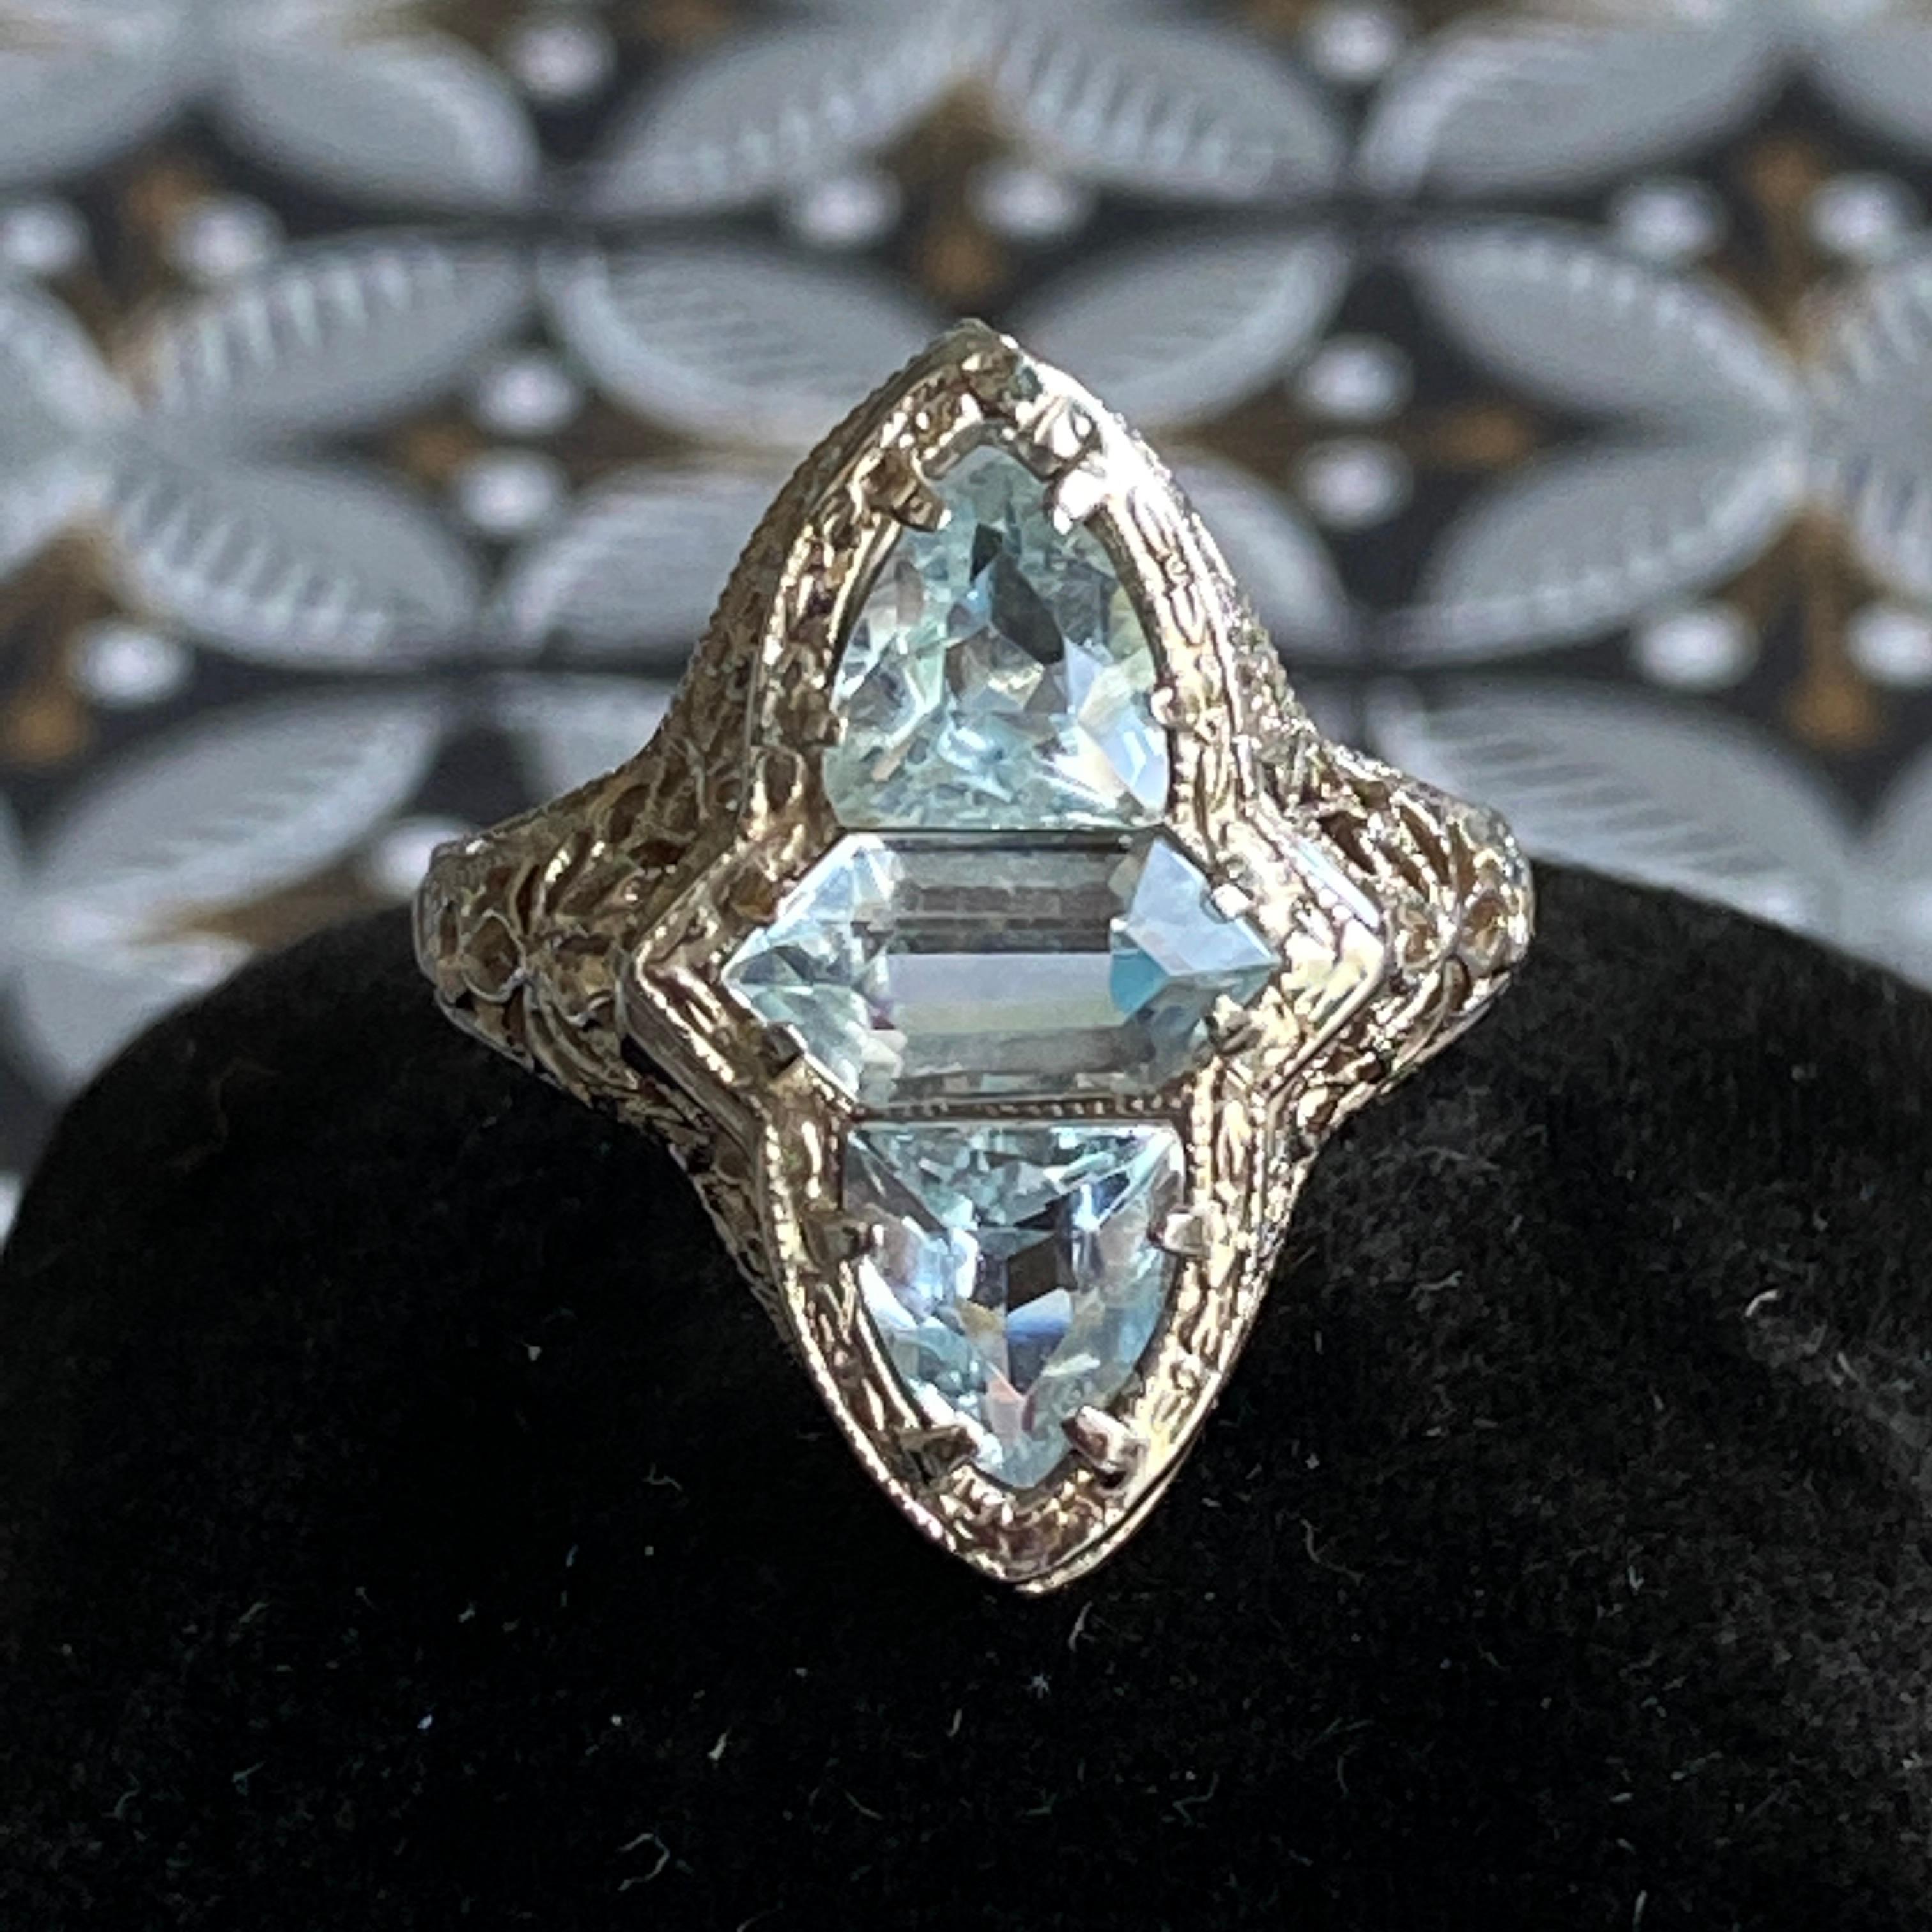 Details:
Stunning Edwardian 14K white gold floral patterned filigree details and three gorgeous aquamarine stones! The two triangle aquamarines measure 5mm x 6mm; and center stone measures 4mm x 8mm, with a classic beautiful blue color. The front of